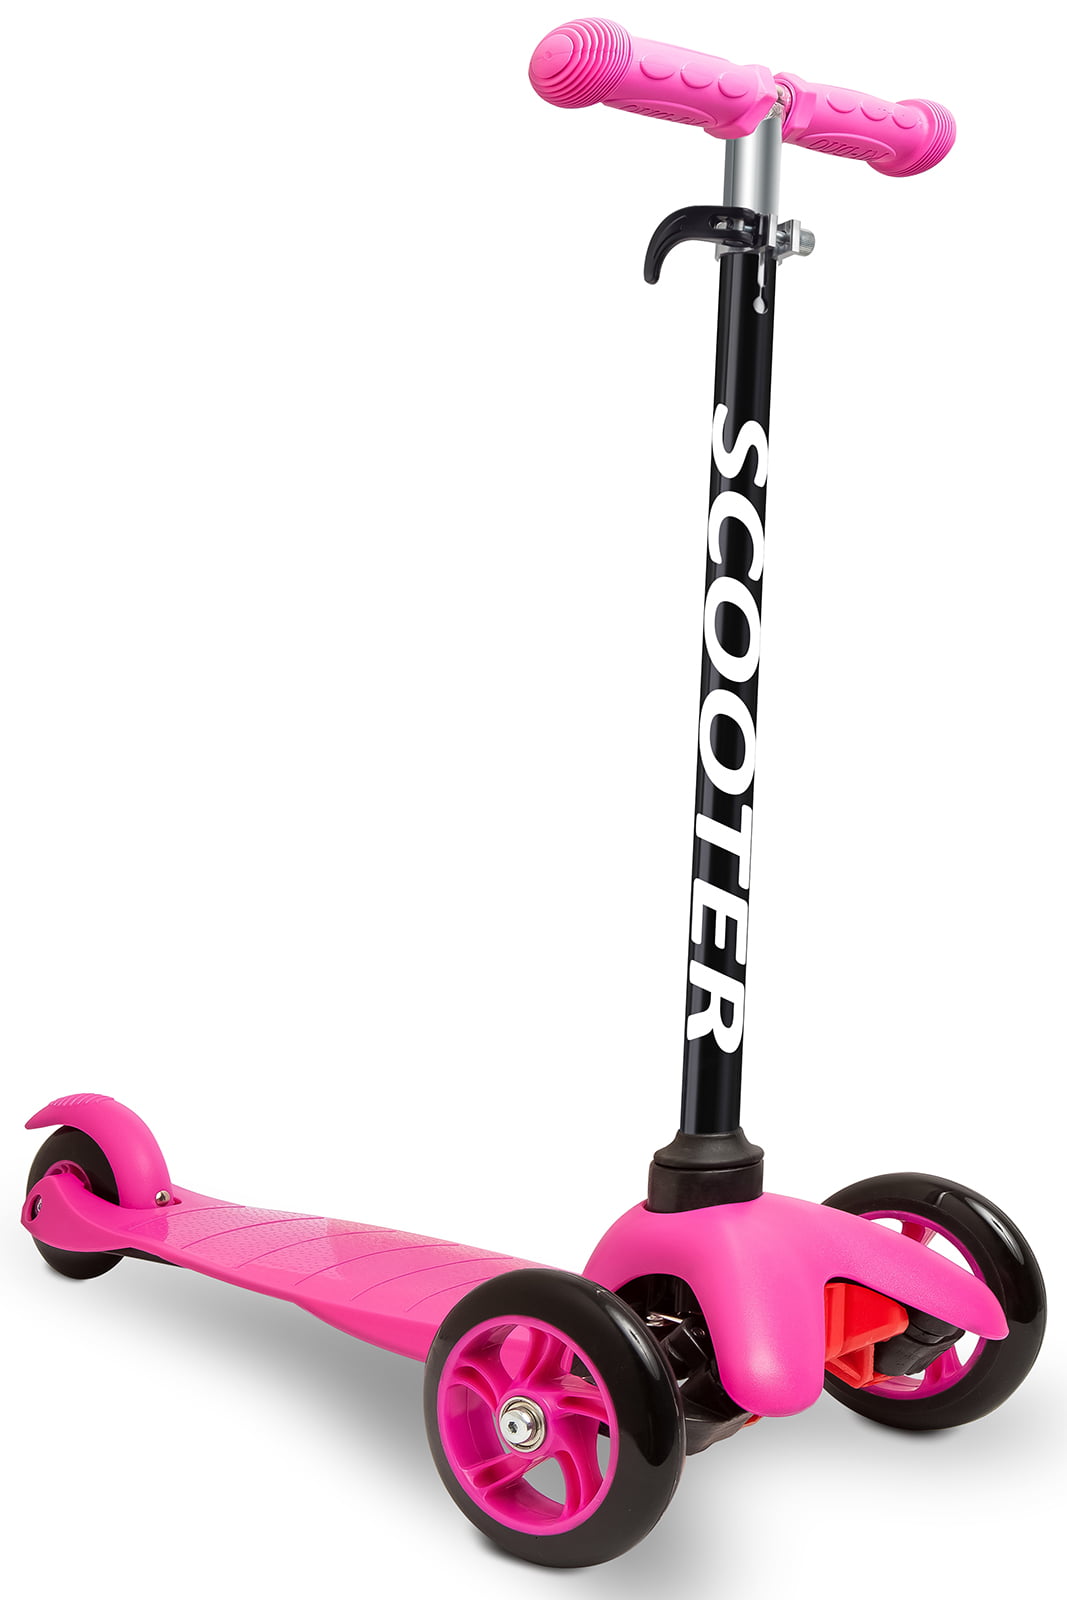 little toy scooters